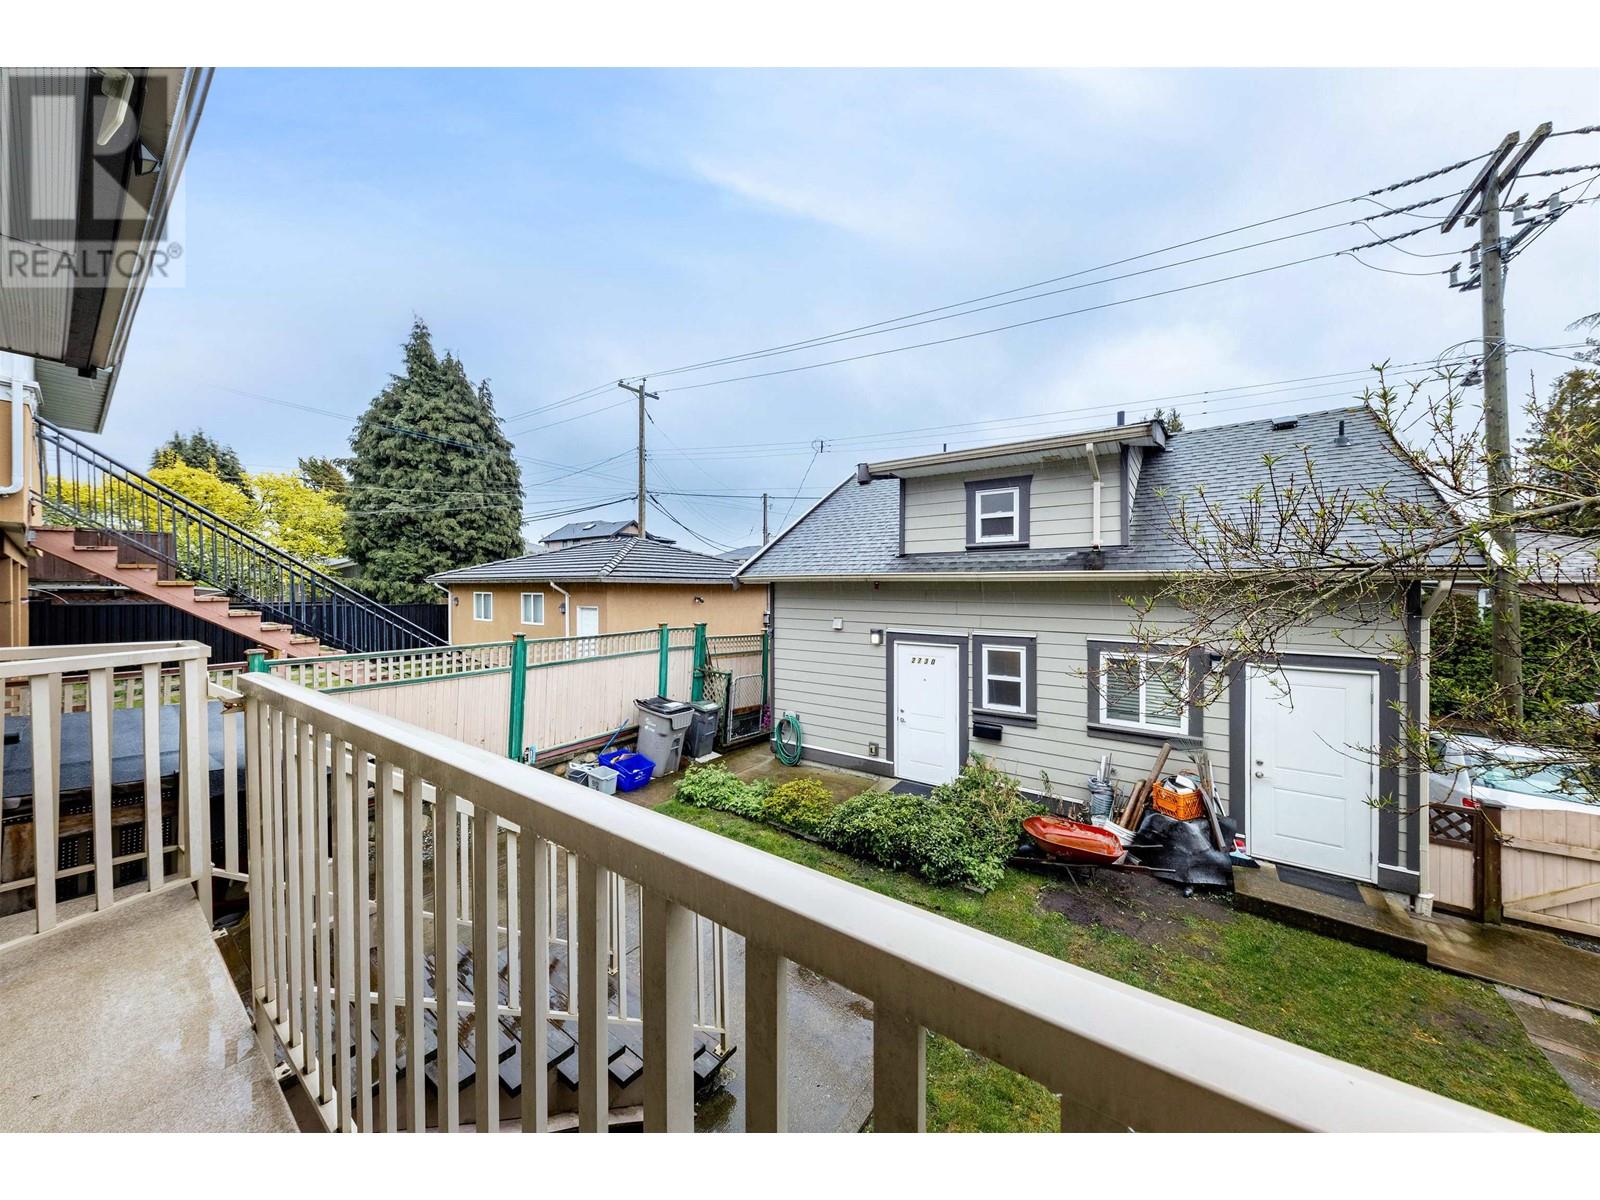 Listing Picture 31 of 39 : 2726 E 49TH AVENUE, Vancouver / 溫哥華 - 魯藝地產 Yvonne Lu Group - MLS Medallion Club Member